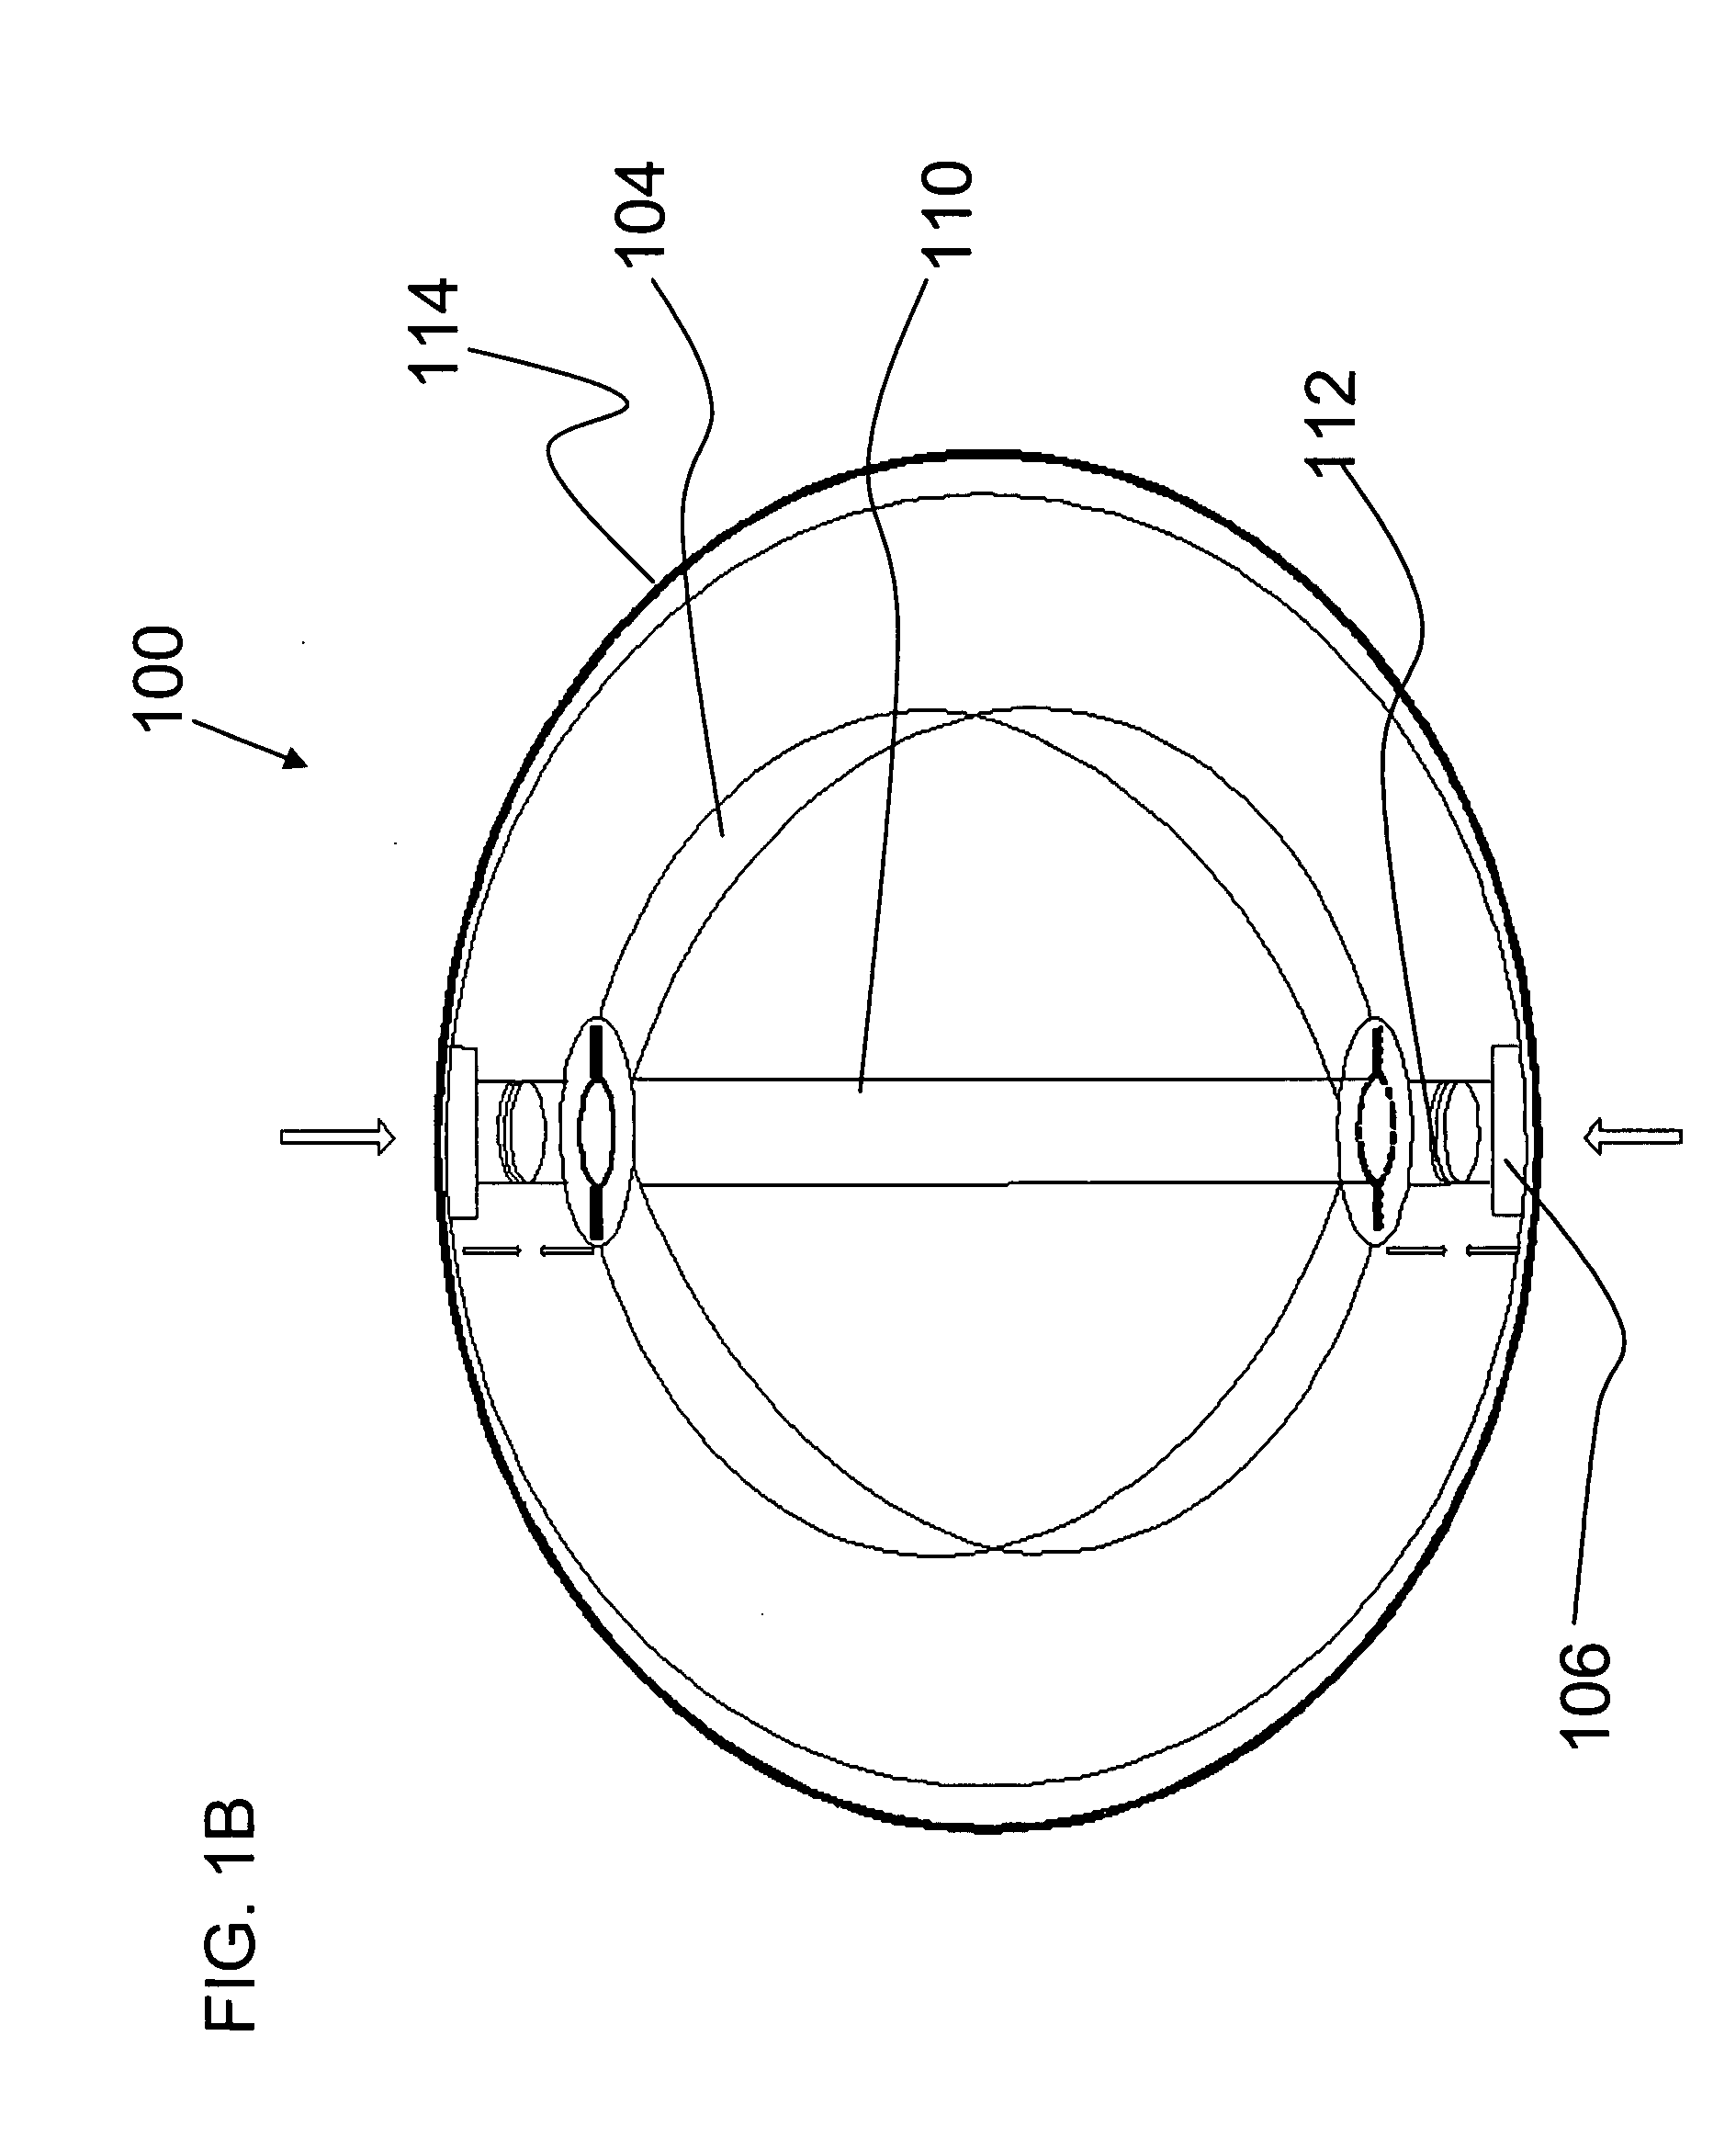 Implantable device with miniature rotating portion for the treatment of atherosclerosis, especially vulnerable plaques